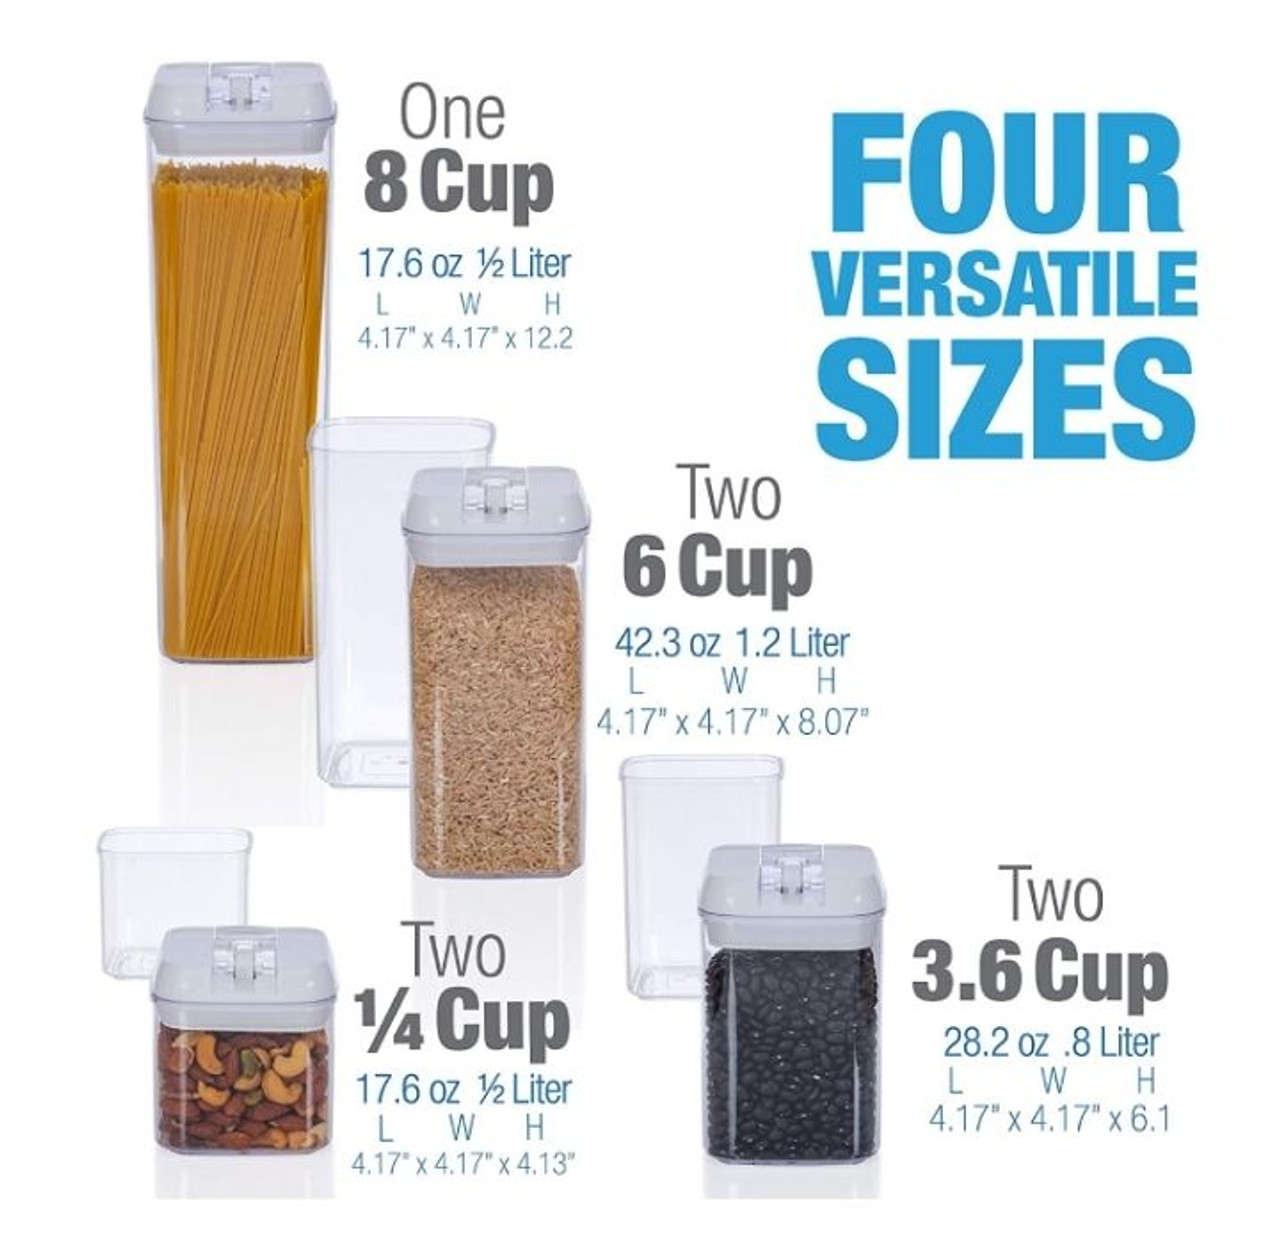 Airtight Food Storage Container Set-Cineyo-7 Piece Set Clear Plastic  Canisters f